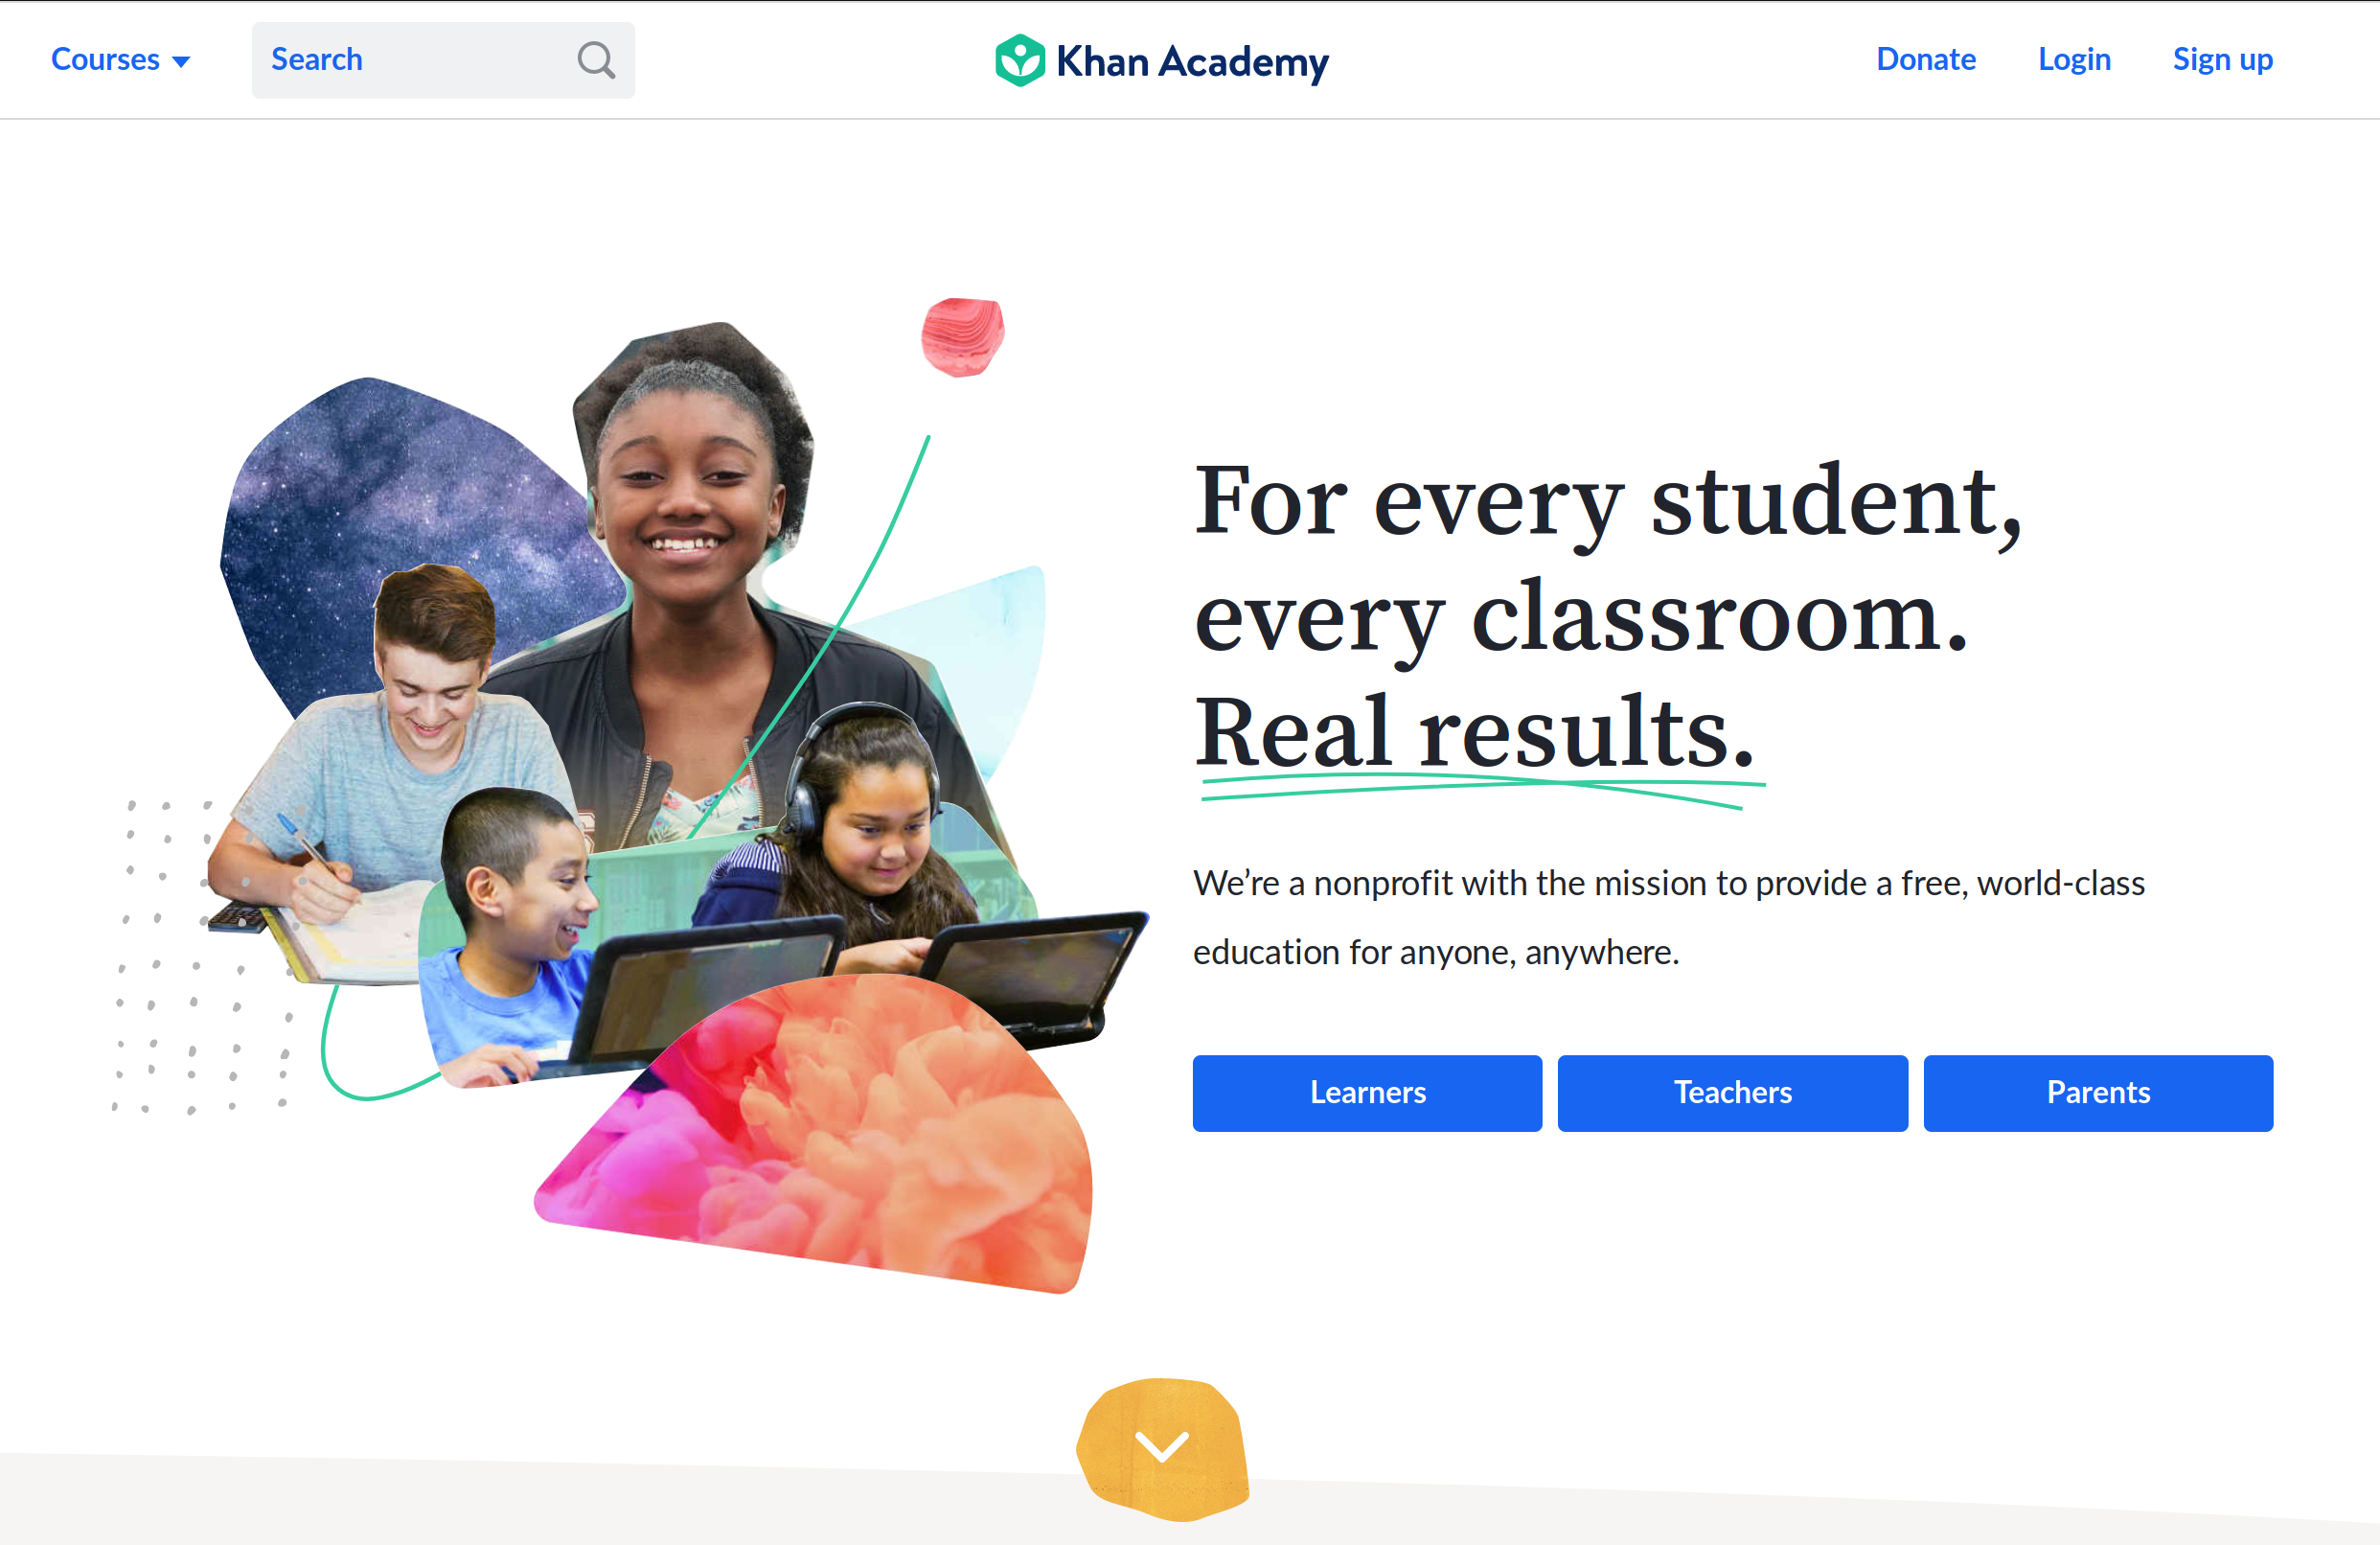 Khan Academy's Landing Page: We’re a nonprofit with the mission to provide a free, world-class education for anyone, anywhere.